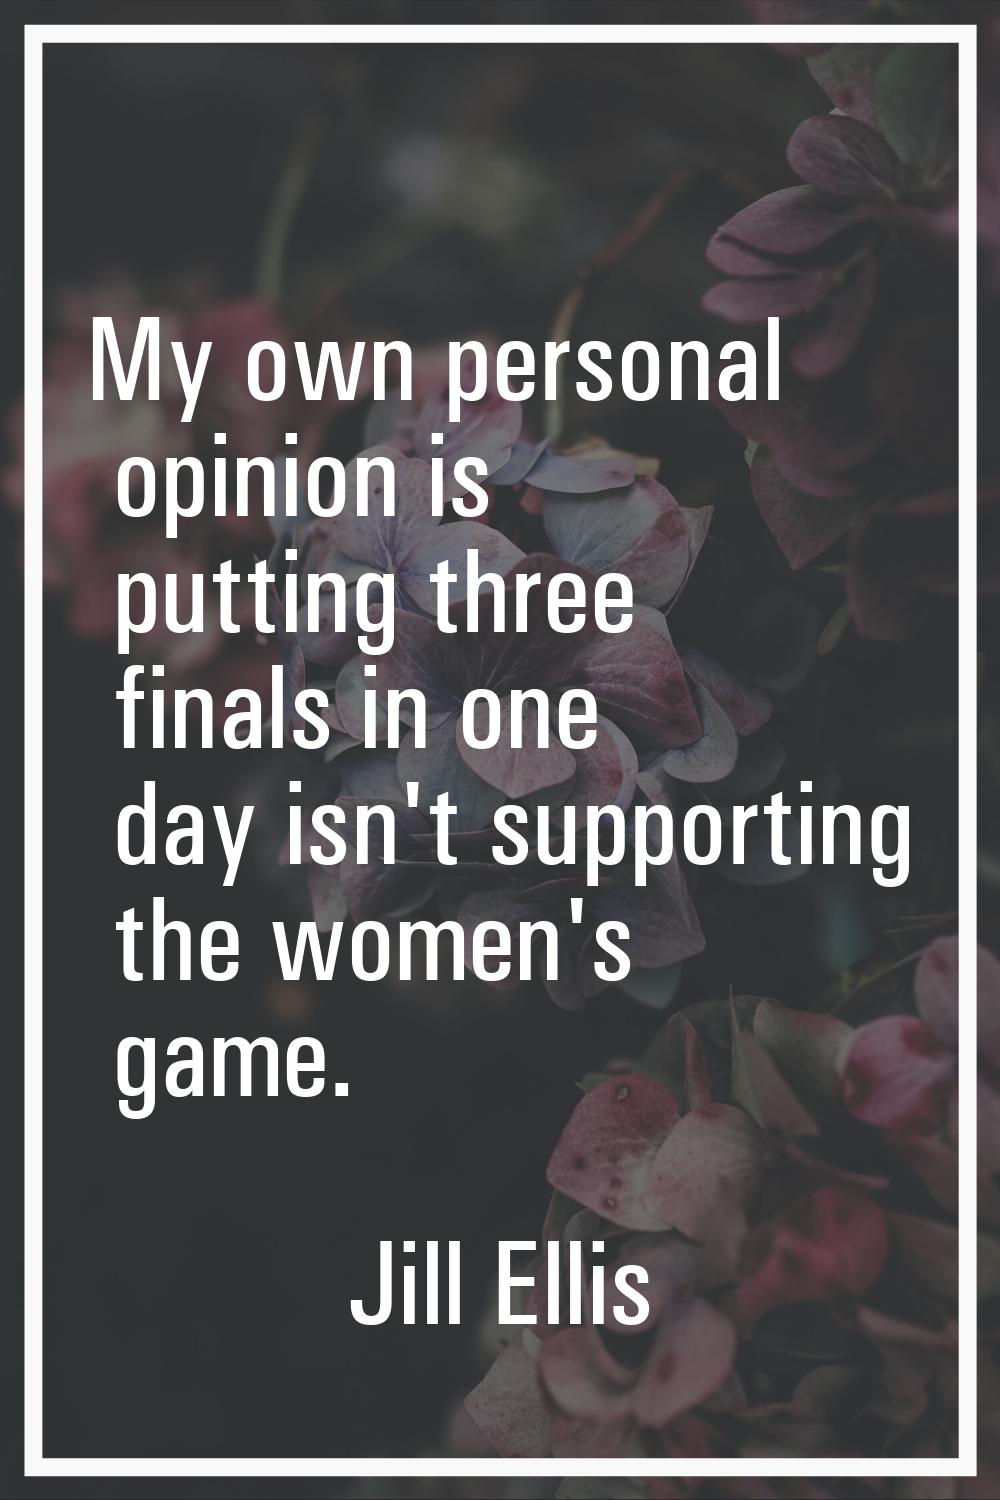 My own personal opinion is putting three finals in one day isn't supporting the women's game.